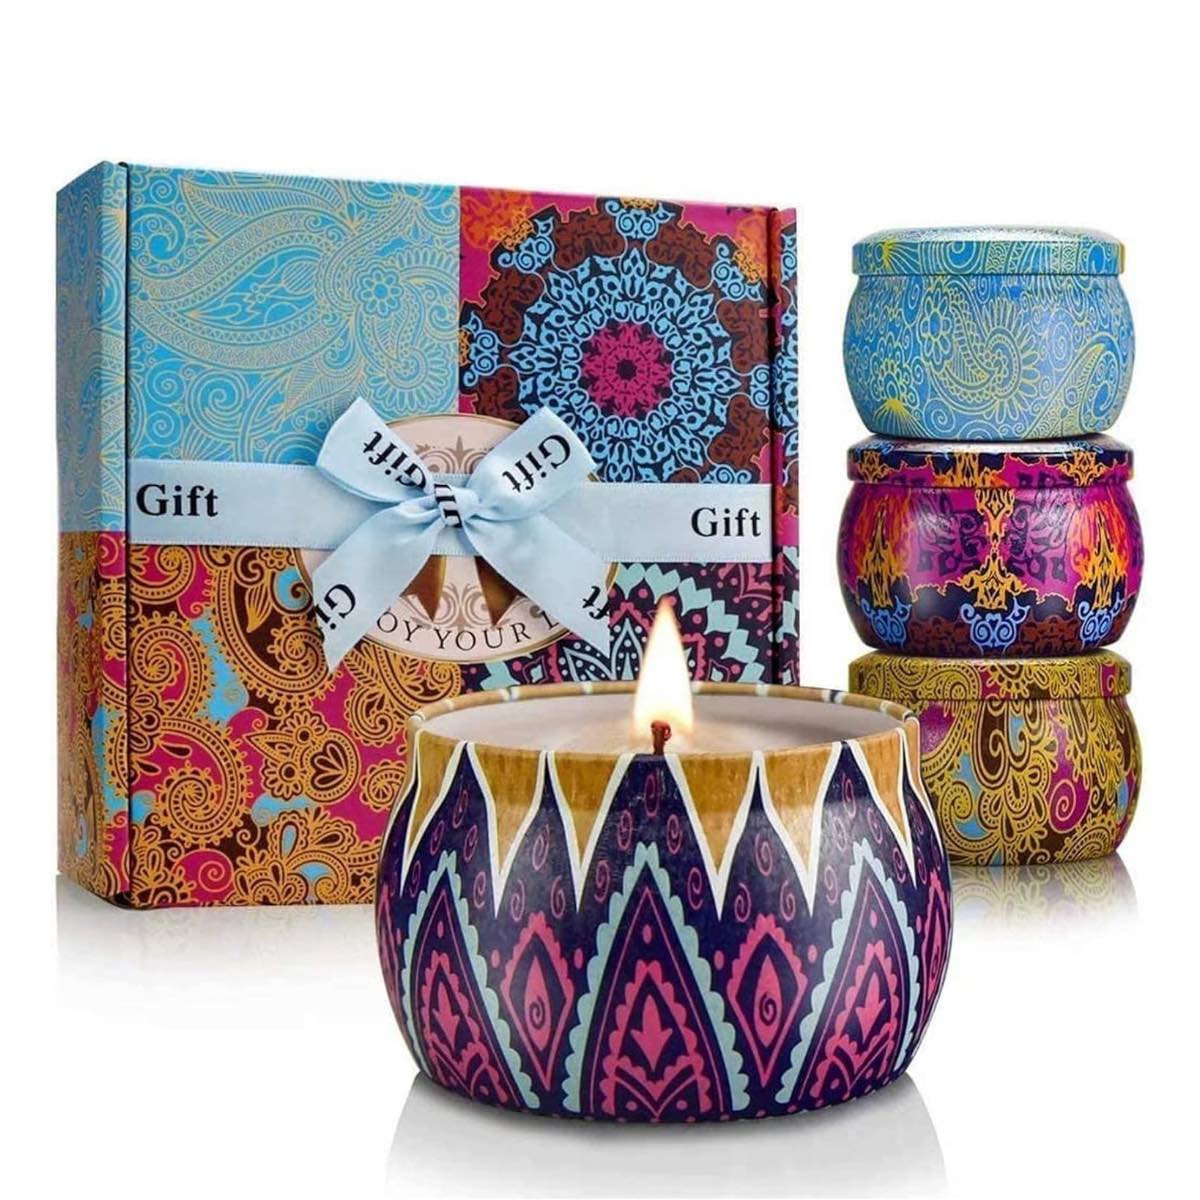 Four beautifully designed soy candles in metal tins packaged in a decorative gift box.